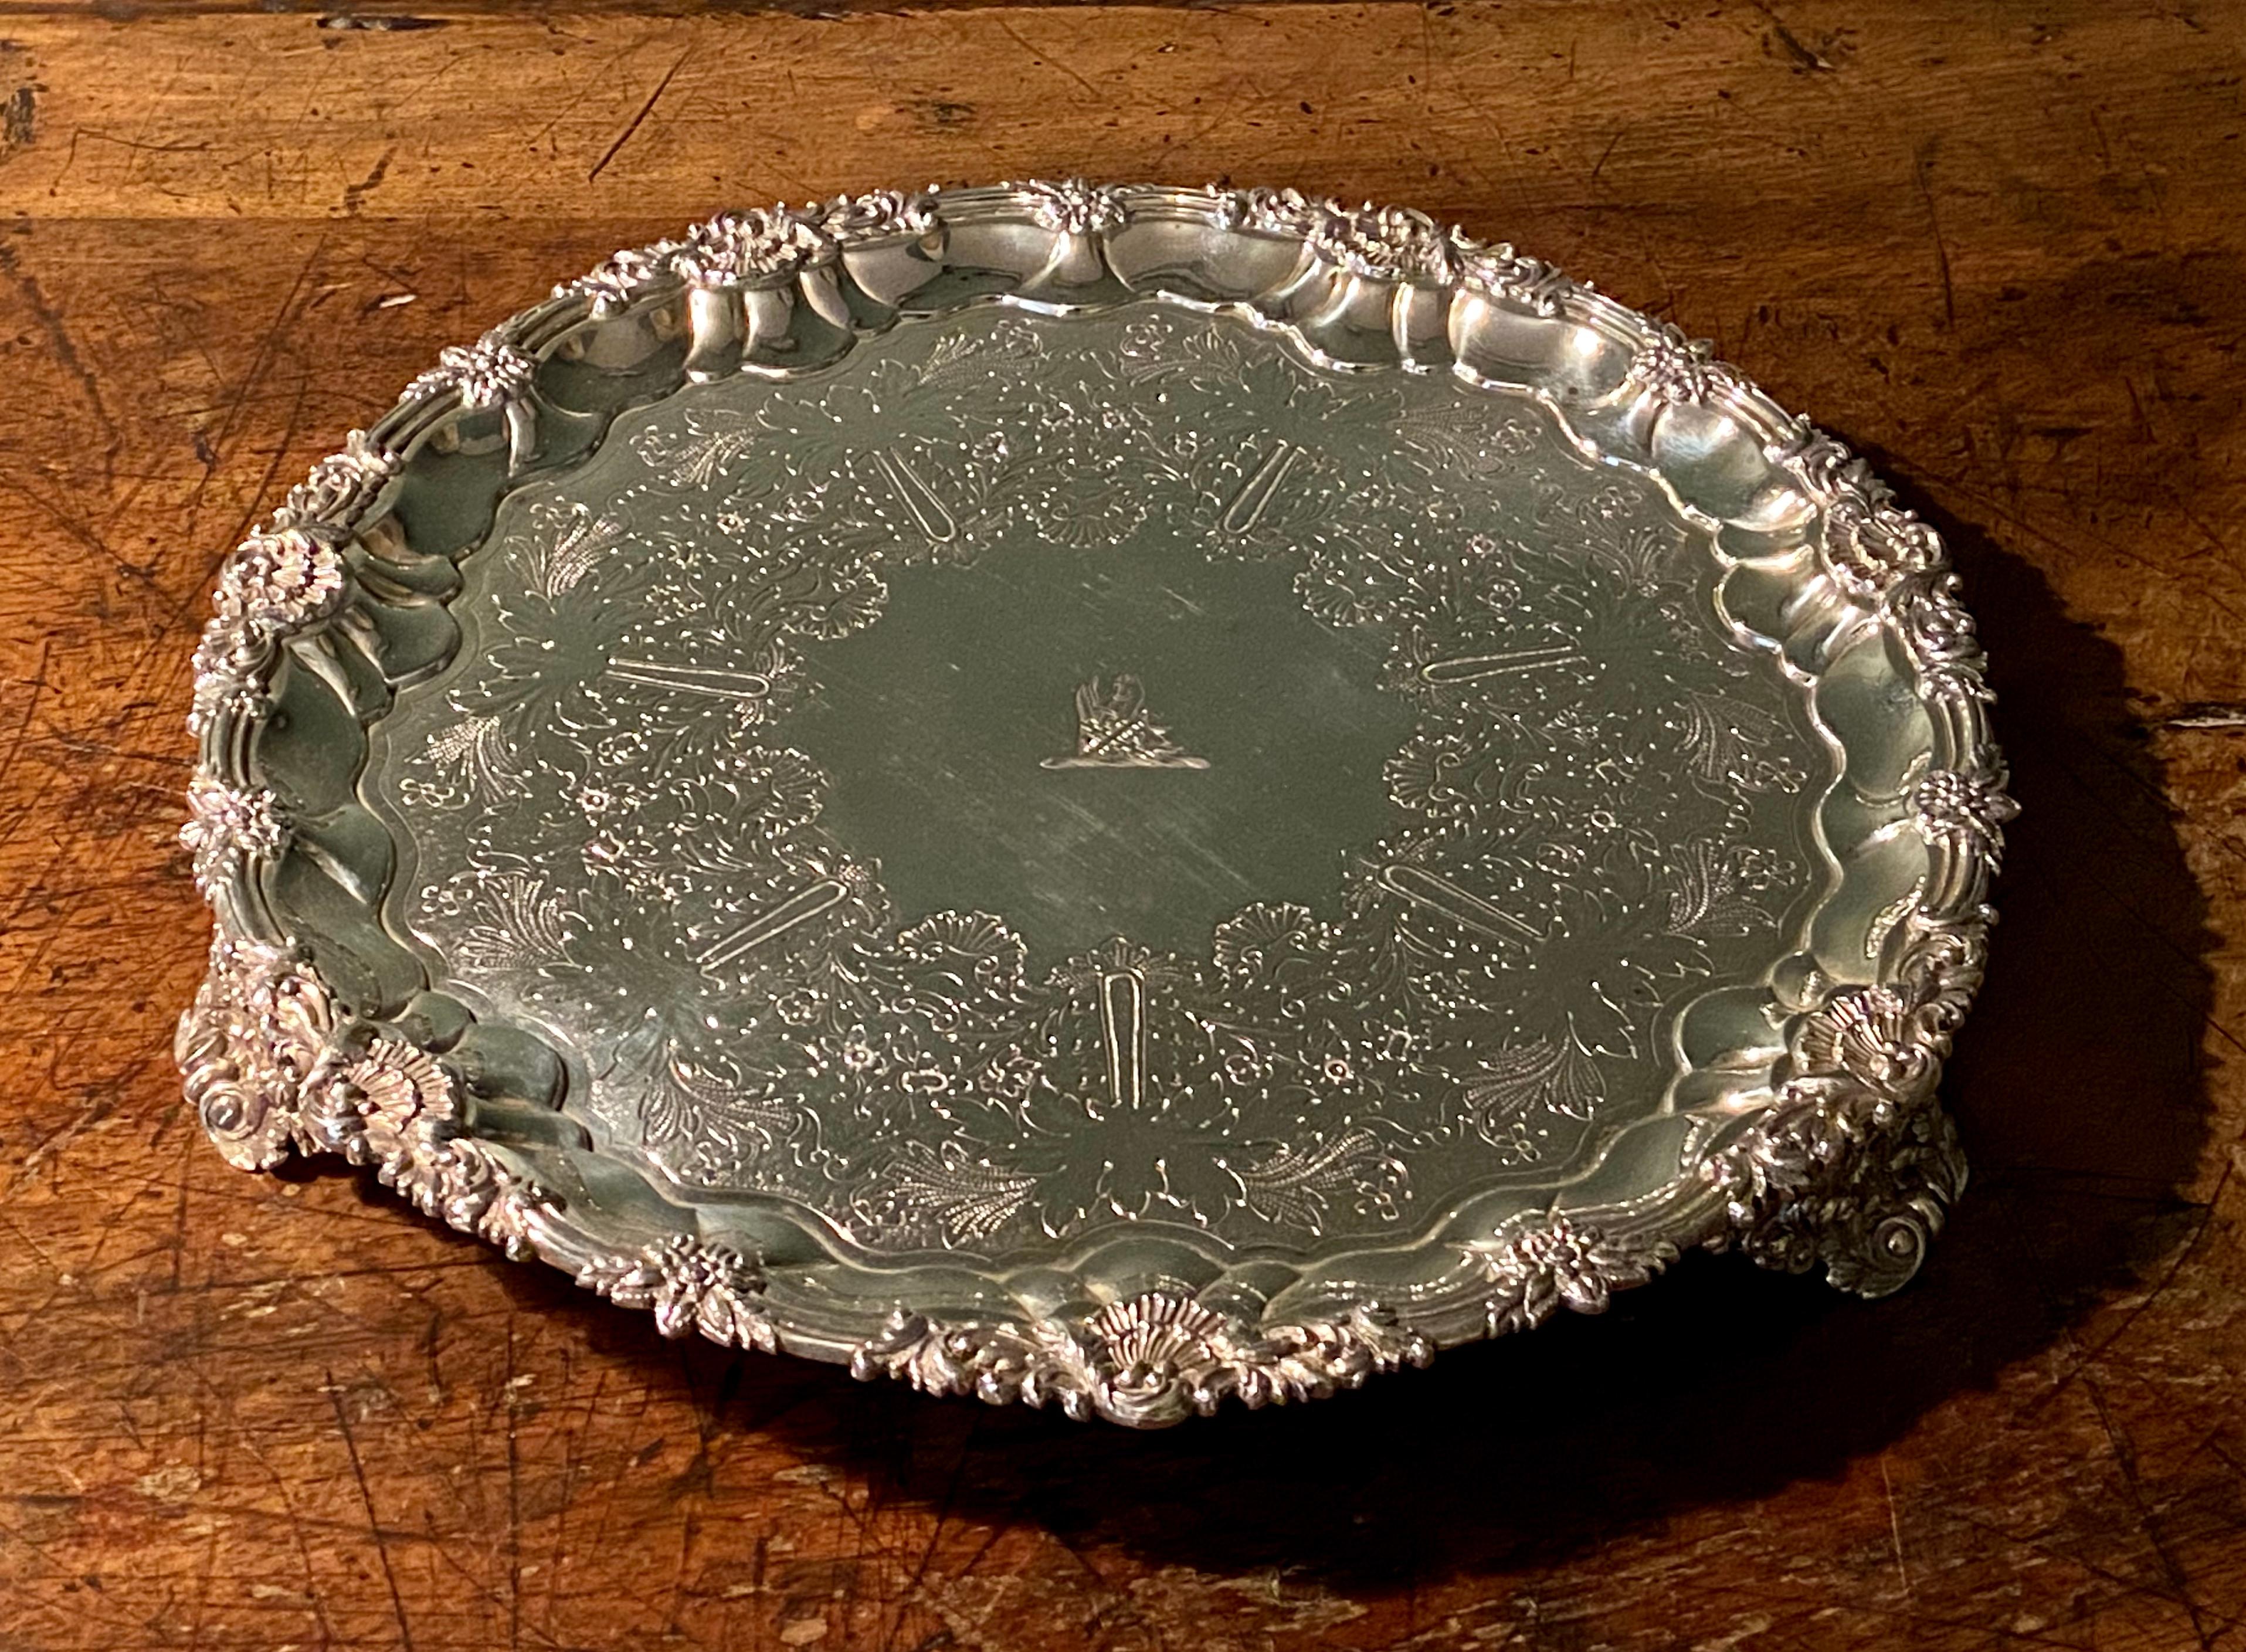 George IV silver salver on three cast shell feet, engraved with a crest, by William Bateman, London, 1829.